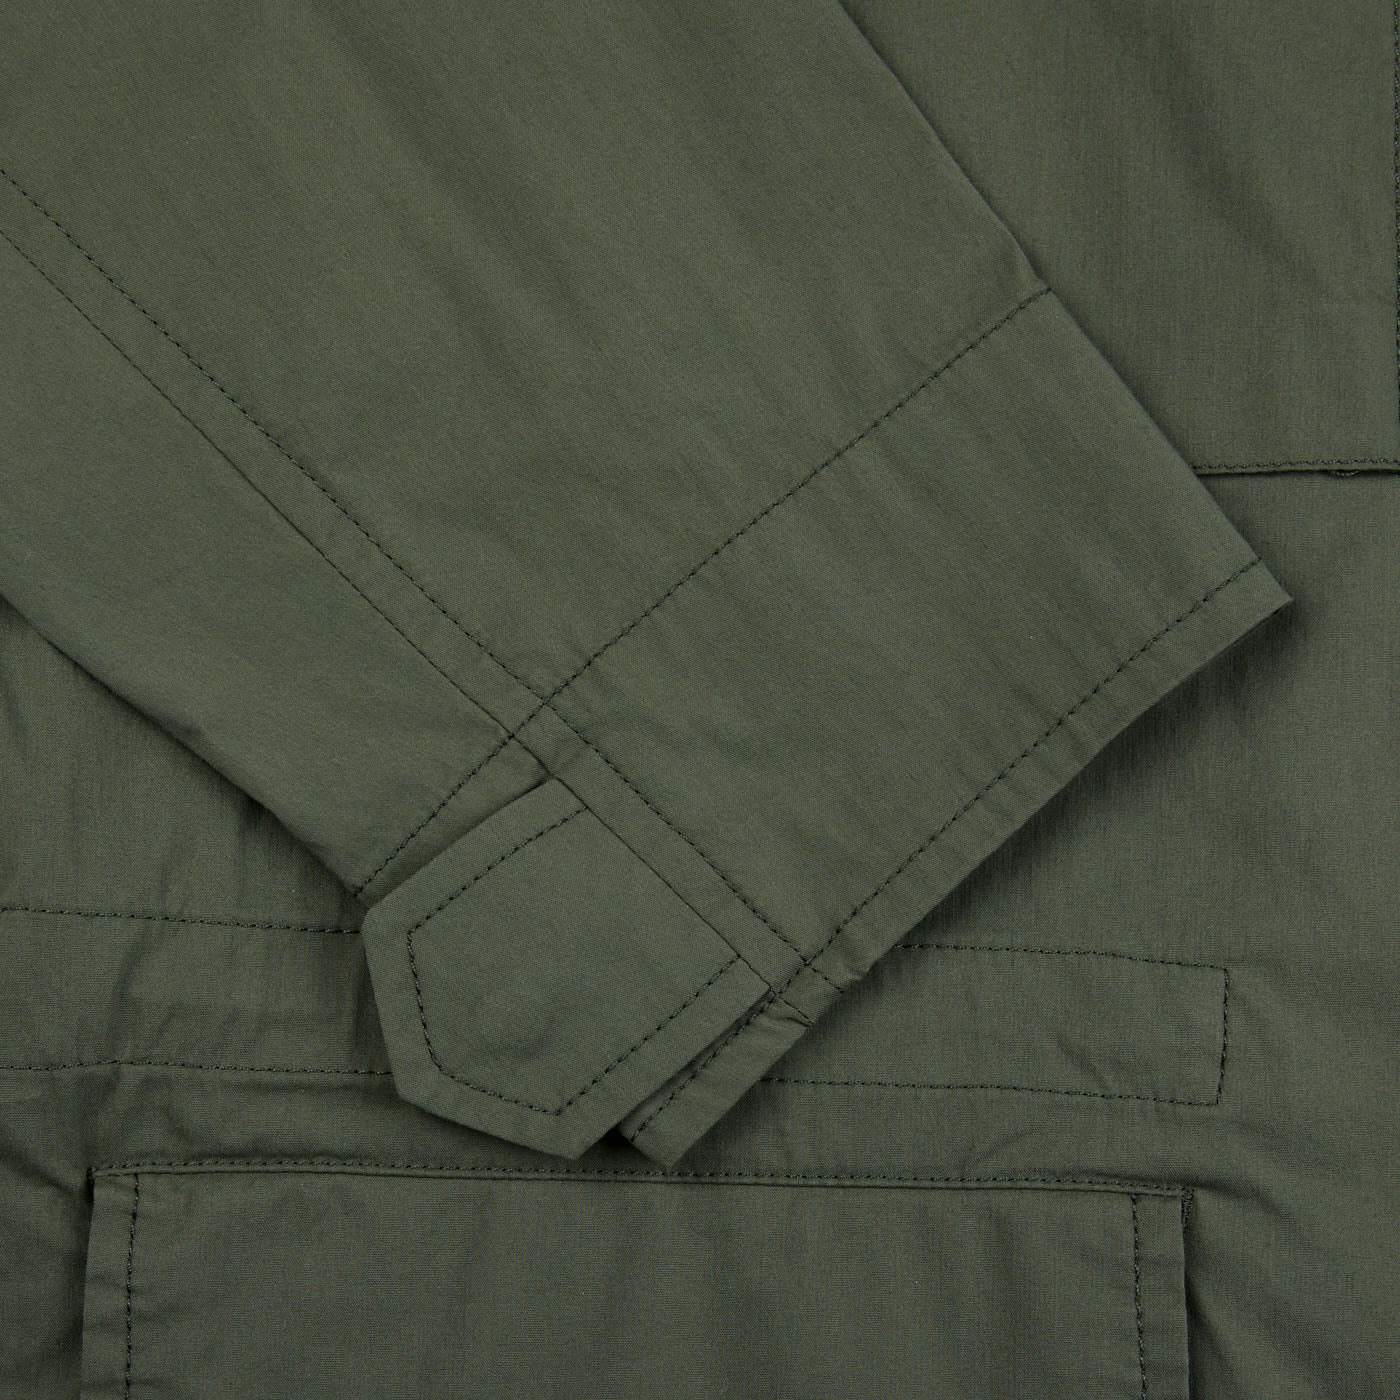 A close up of a military Green Cotton Nylon M65 Field Jacket made by Aspesi with waterproof fabric.